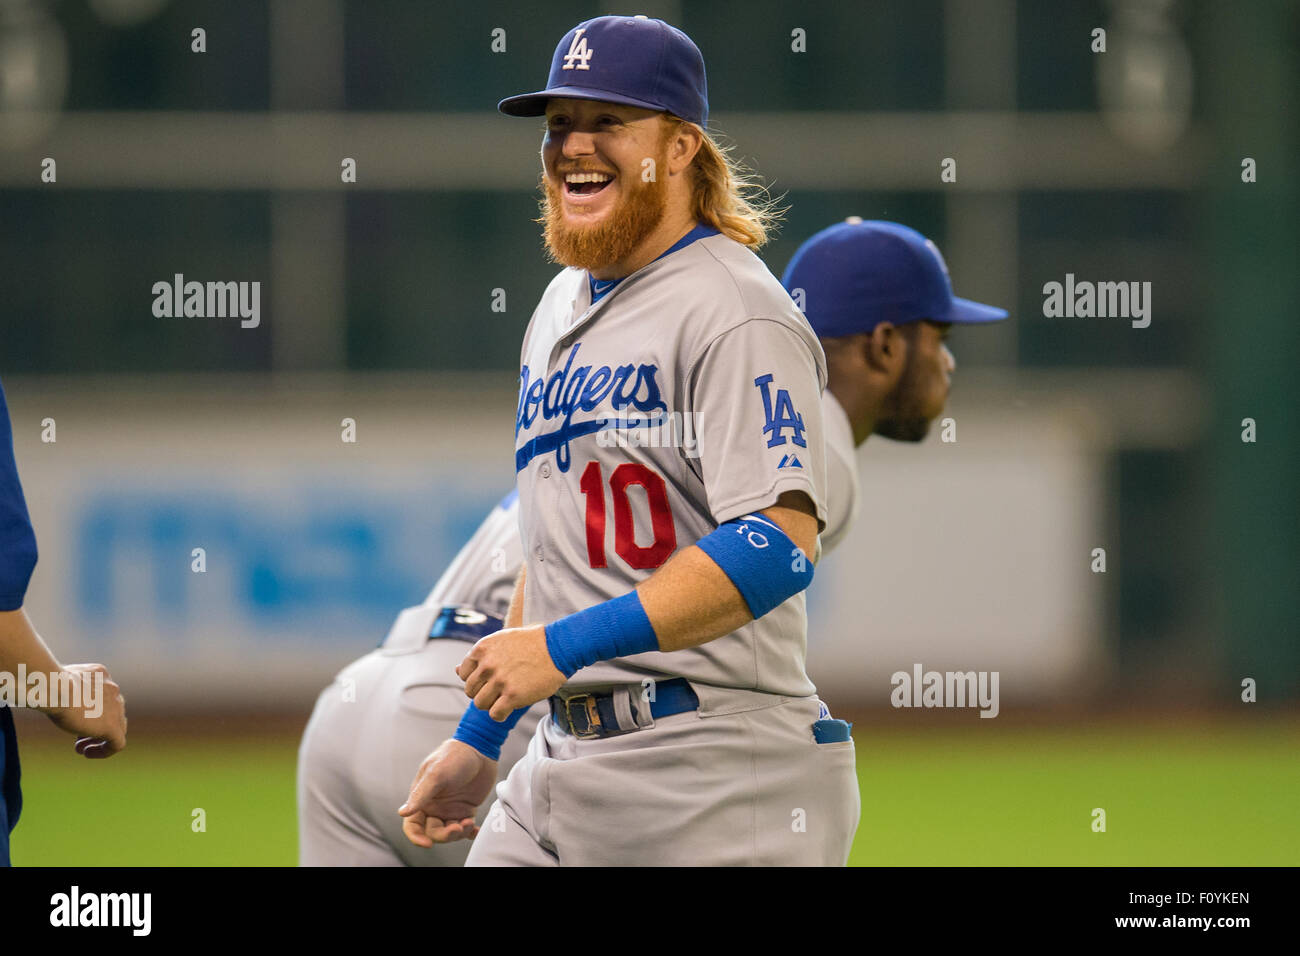 Justin Turner Wife: Who is Justin Turner's wife? Meet Kourtney Pogue